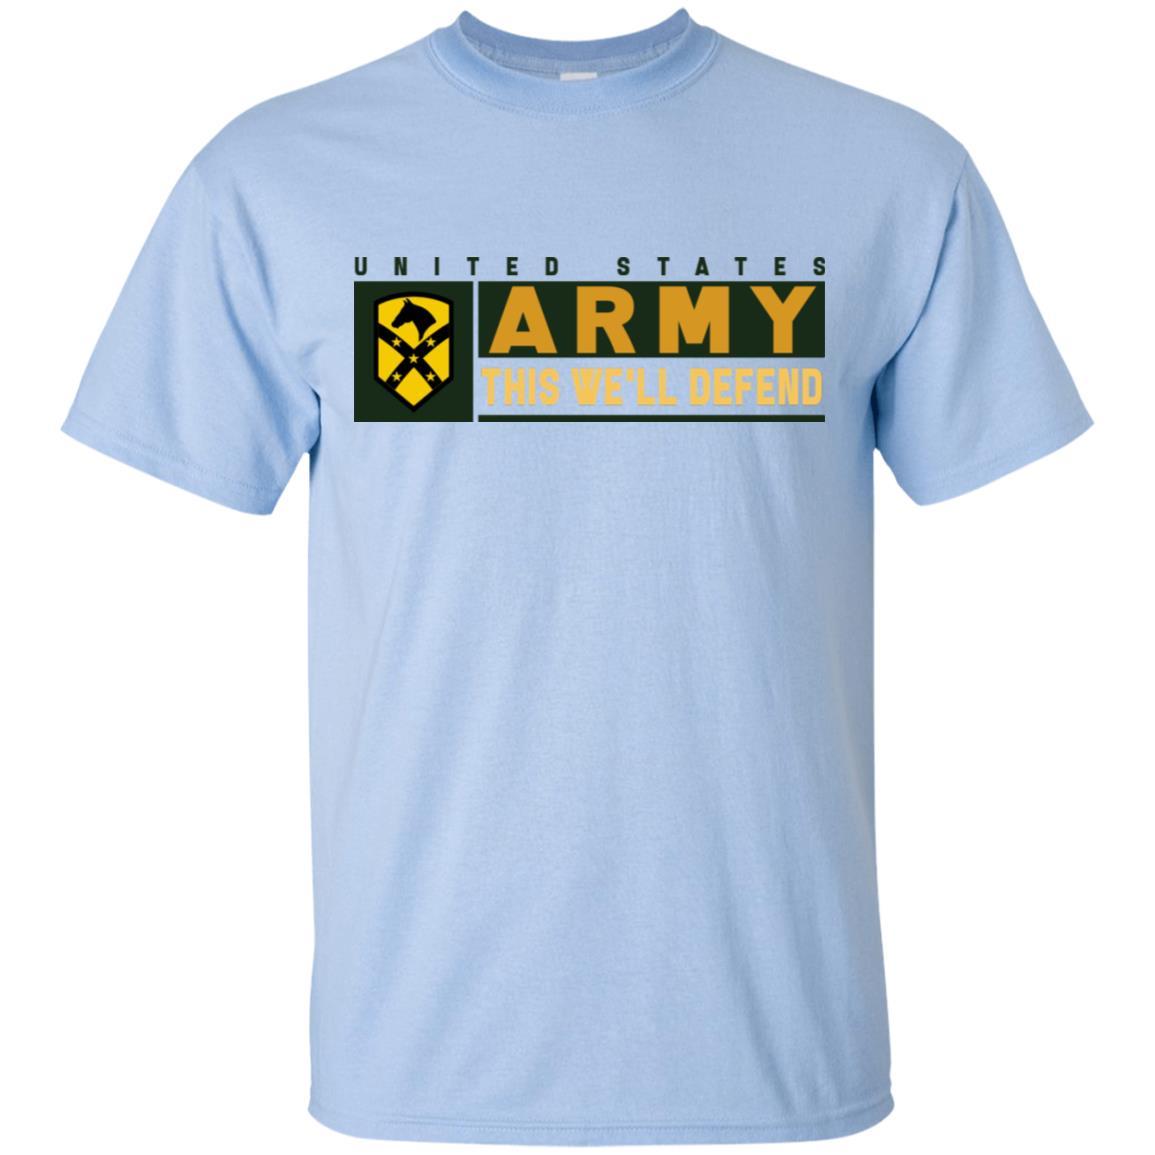 US Army 15TH SUSTAINMENT BRIGADE- This We'll Defend T-Shirt On Front For Men-TShirt-Army-Veterans Nation